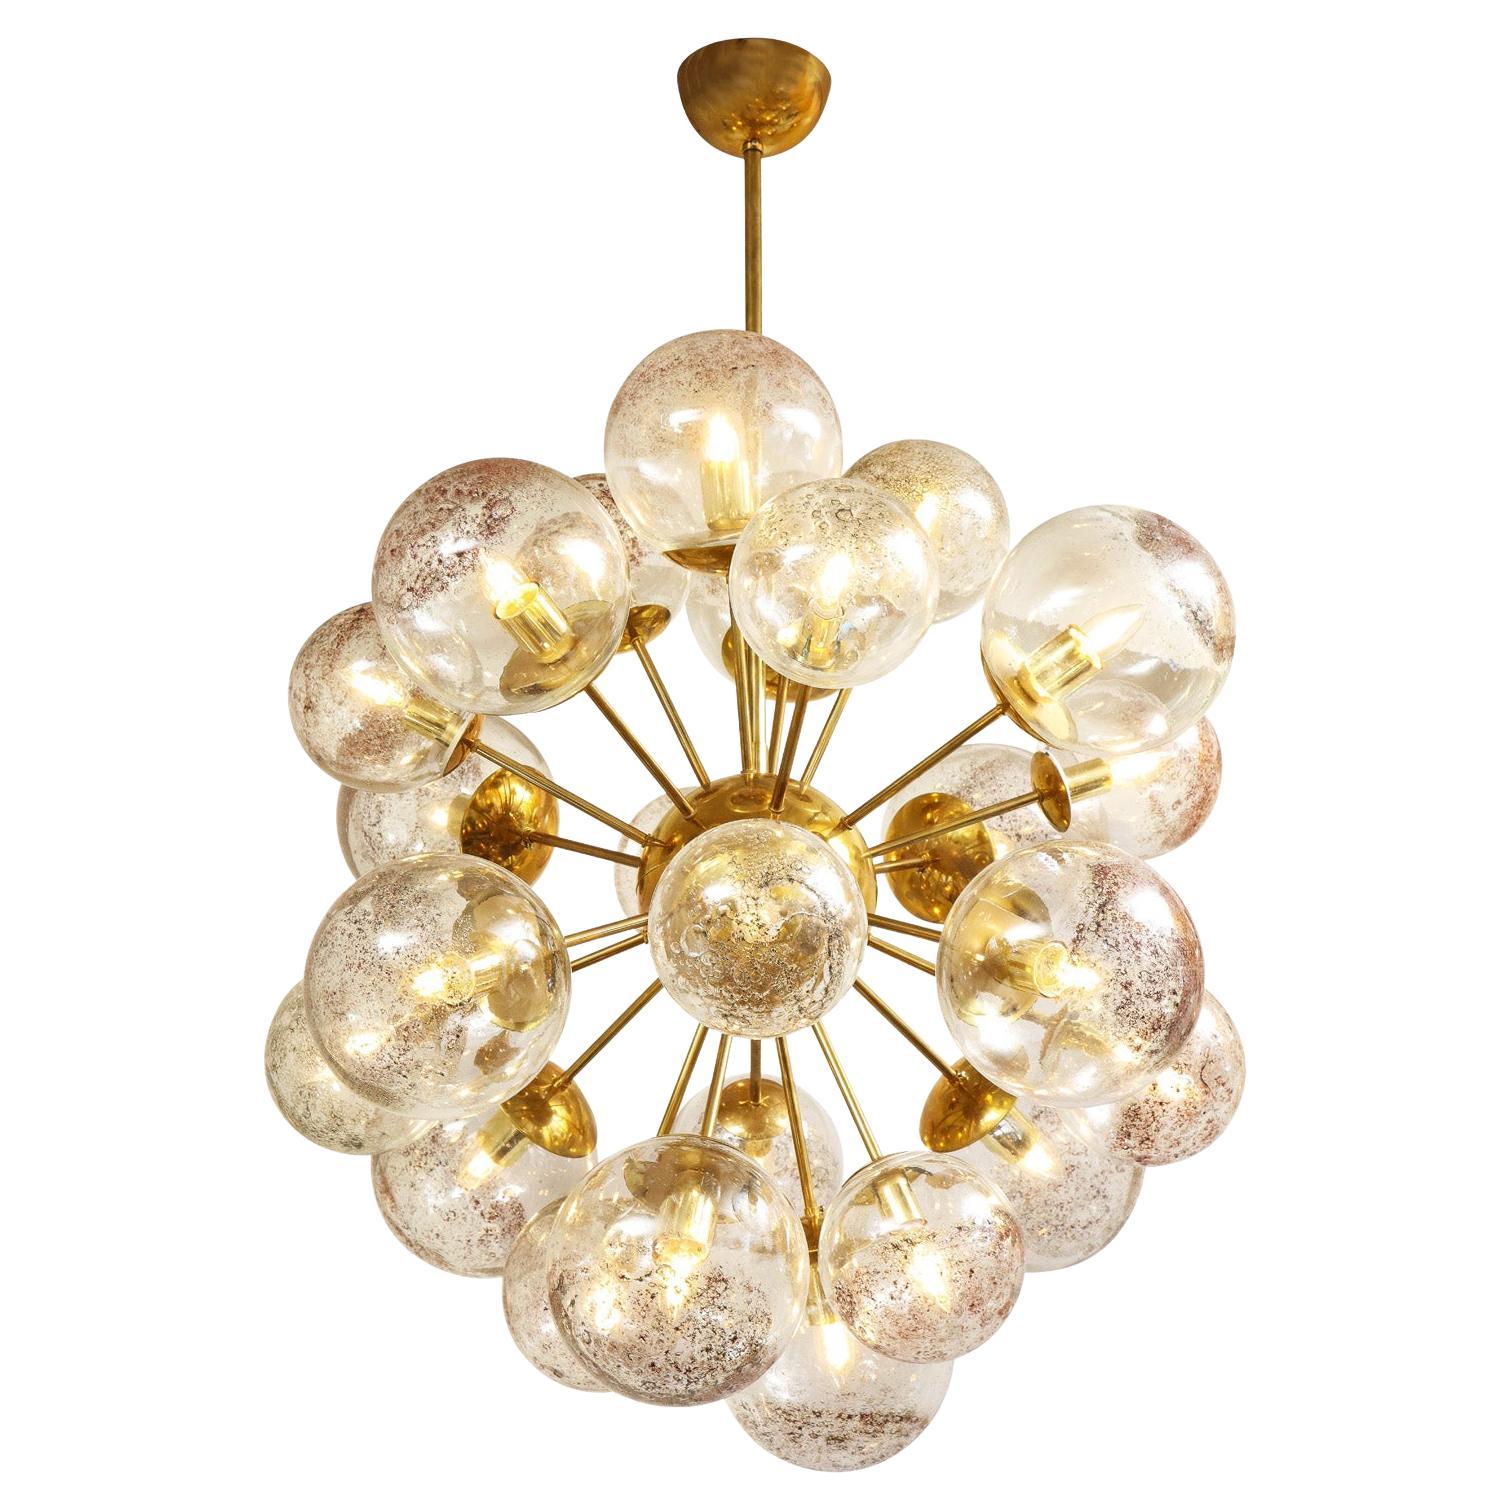 Unique Sputnik-Style Chandelier in Polished Brass with Glass Globes 2022